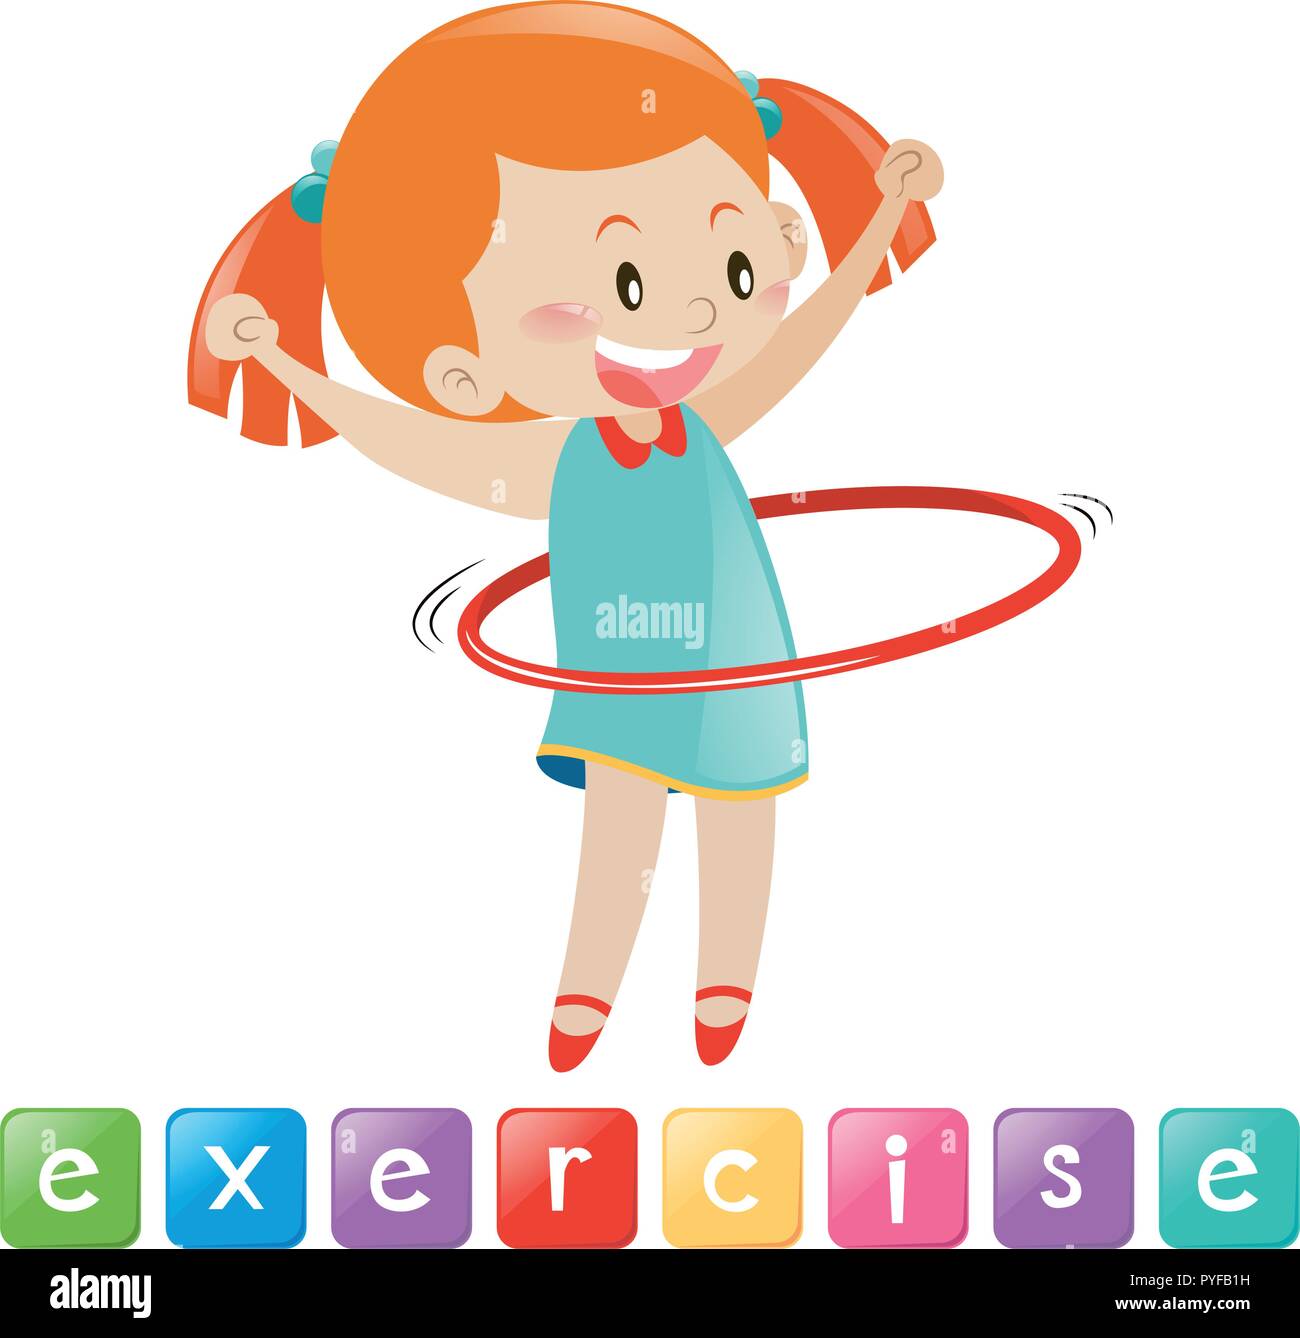 Girl exercise with hulahoop illustration Stock Vector